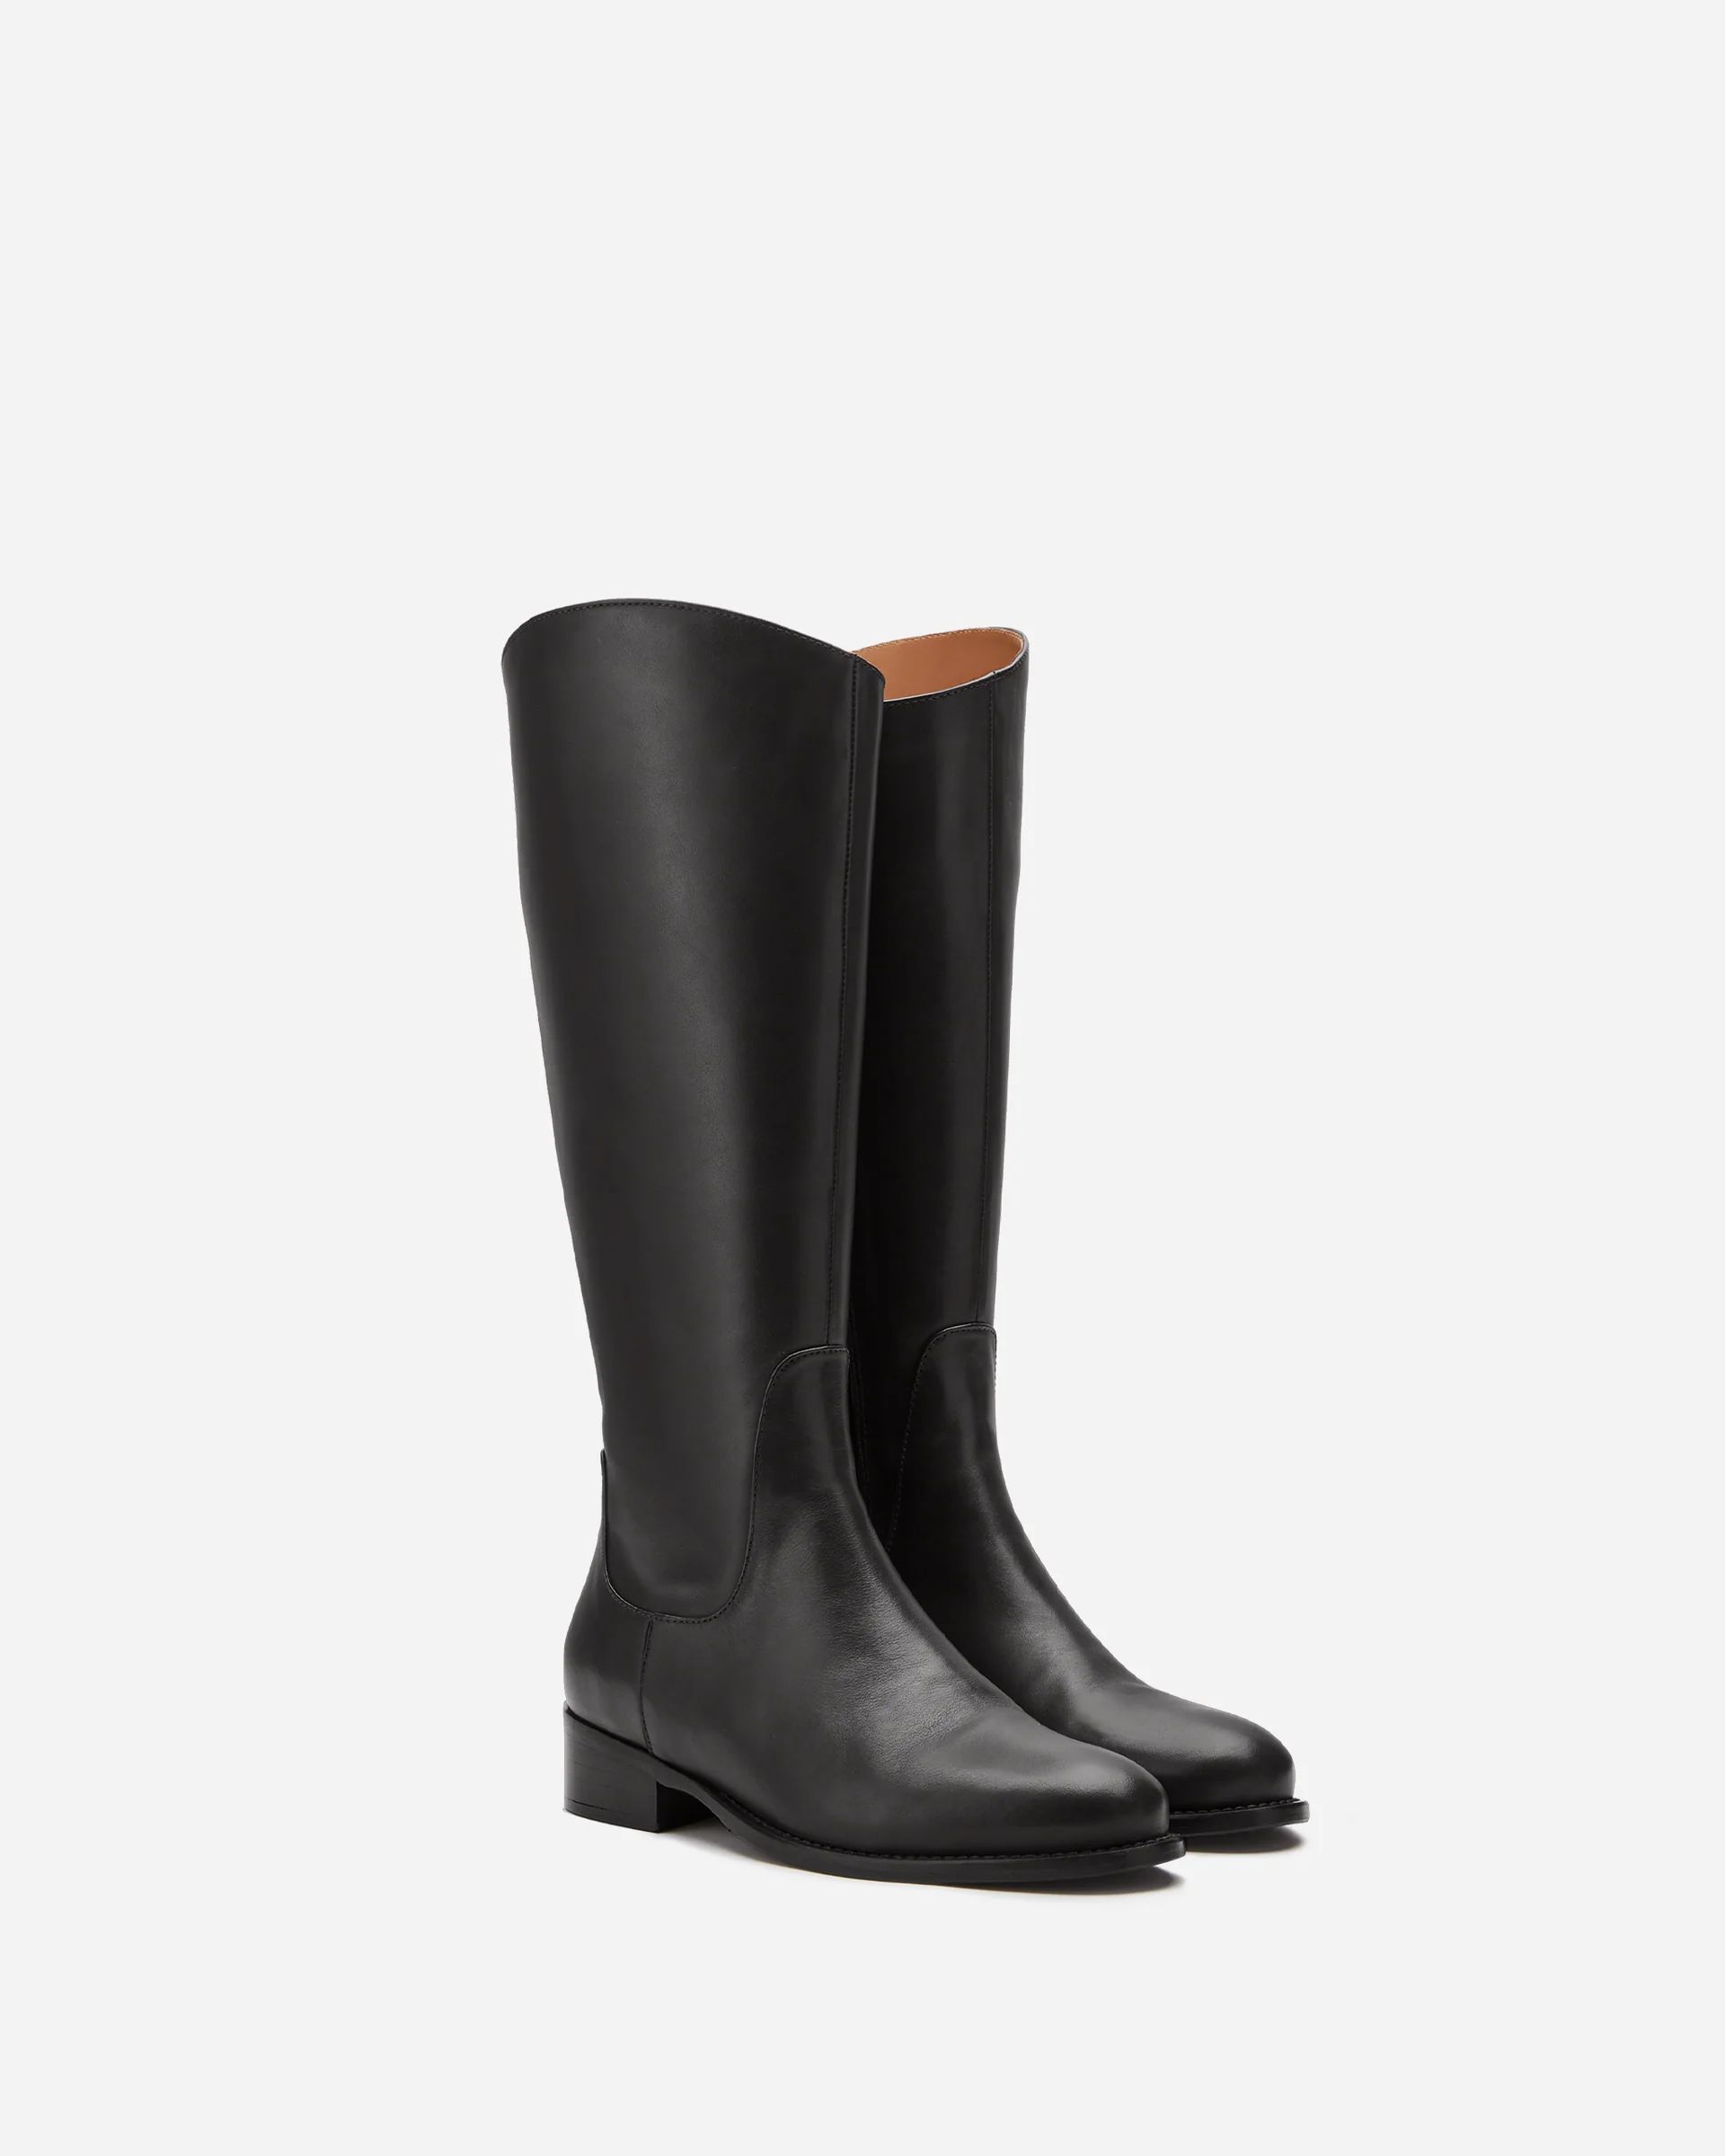 Verity Knee High Boots in Black Leather | DuoBoots